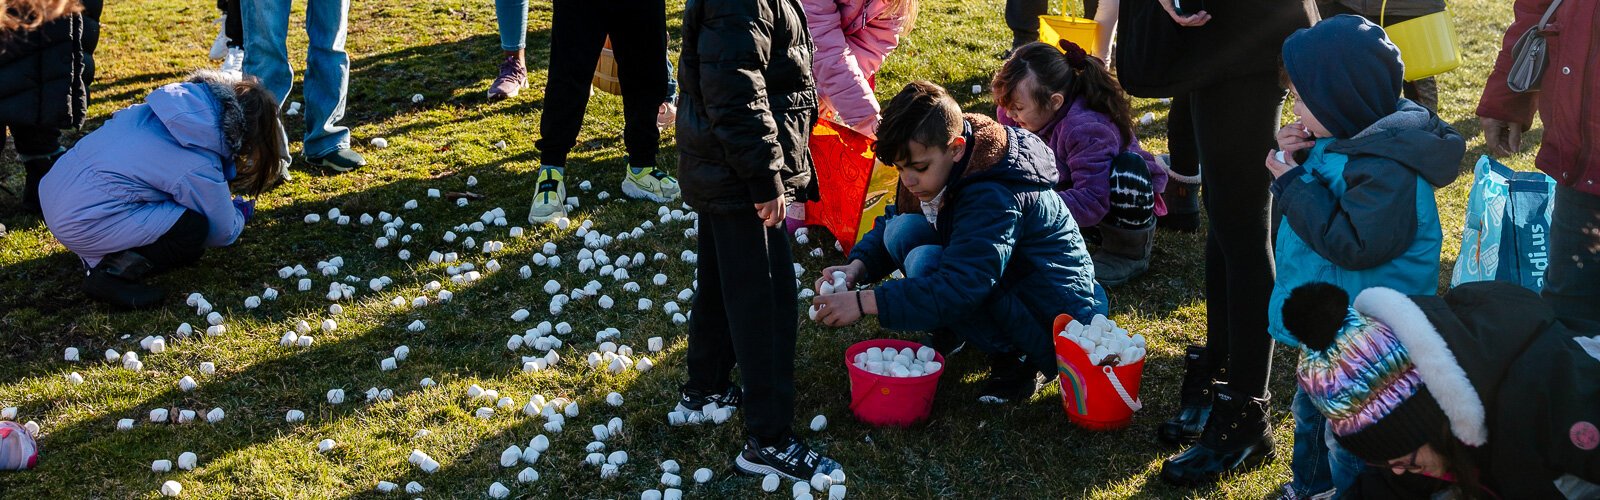 A sensory-friendly marshmallow drop at Nankin Mills Interpretive Center in Westland. After marshmallows are dropped from a fire truck ladder, children can turn them in for prizes.